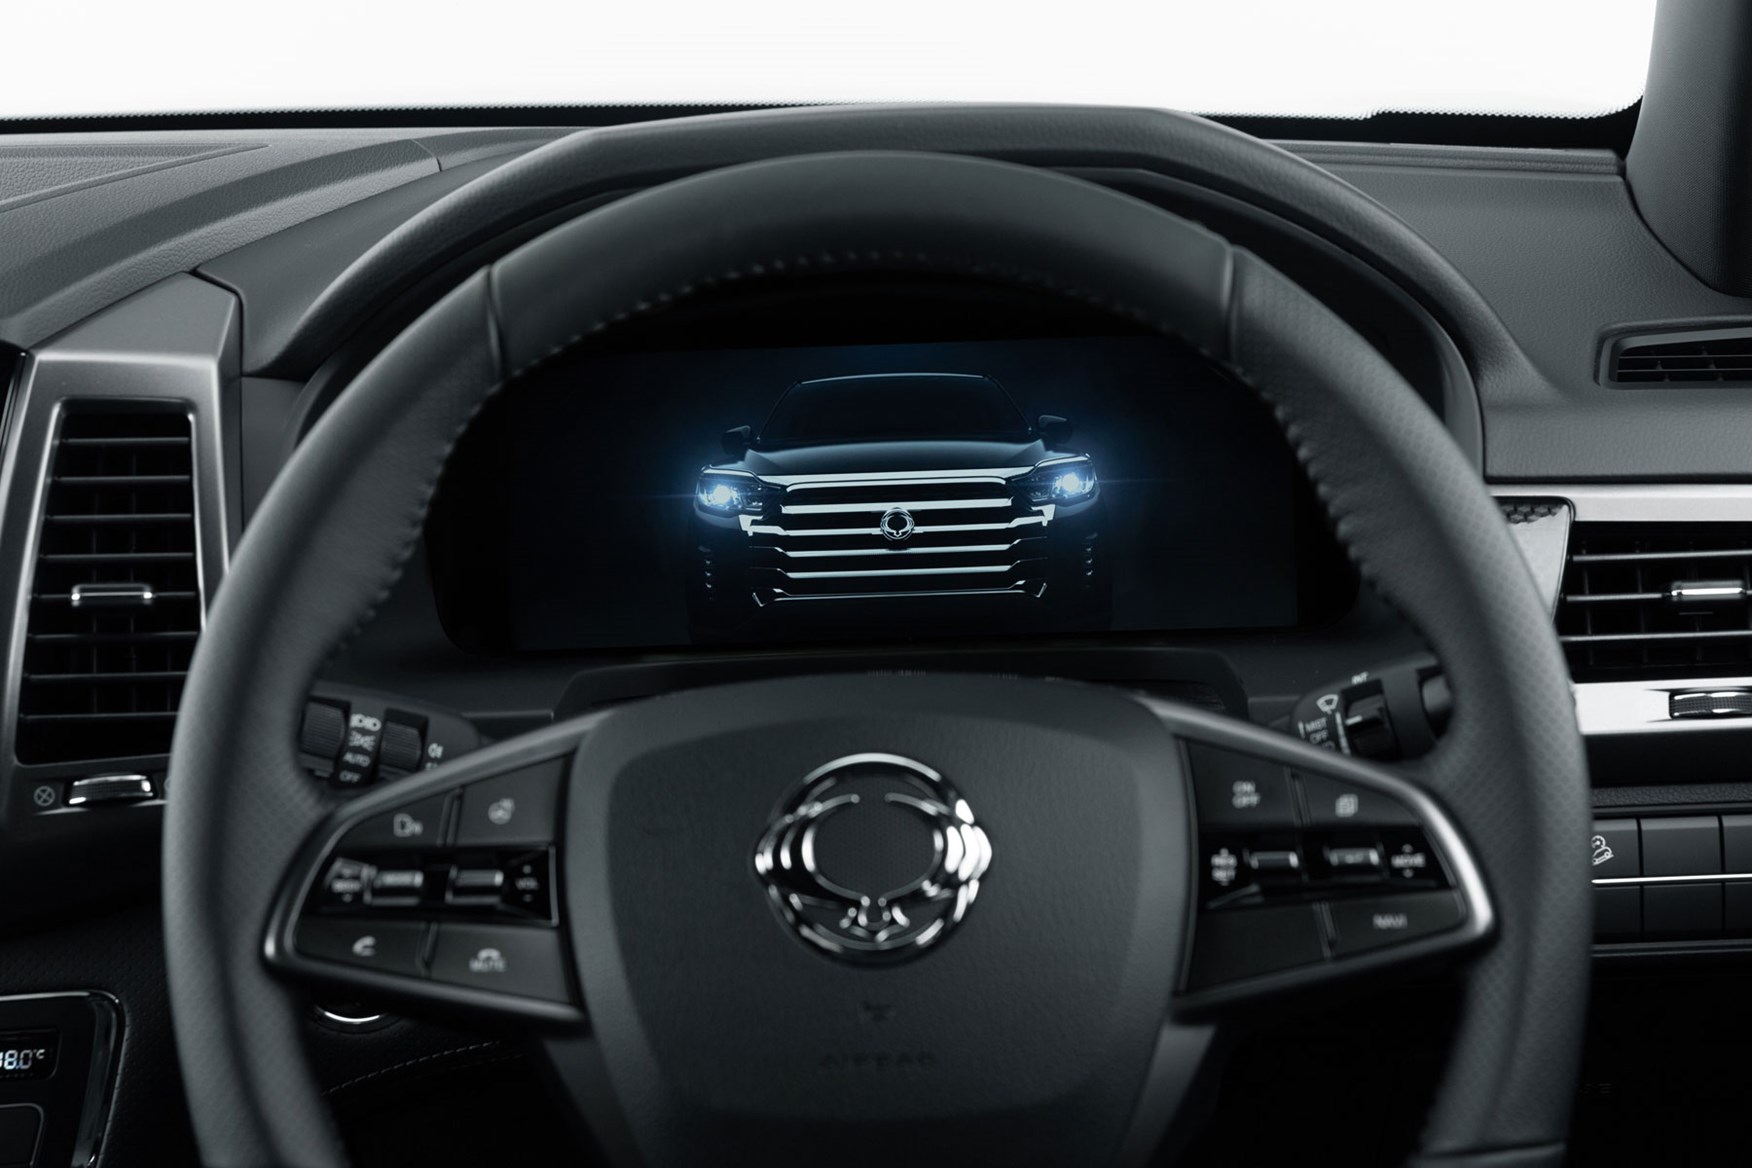 SsangYong Musso instrument panel